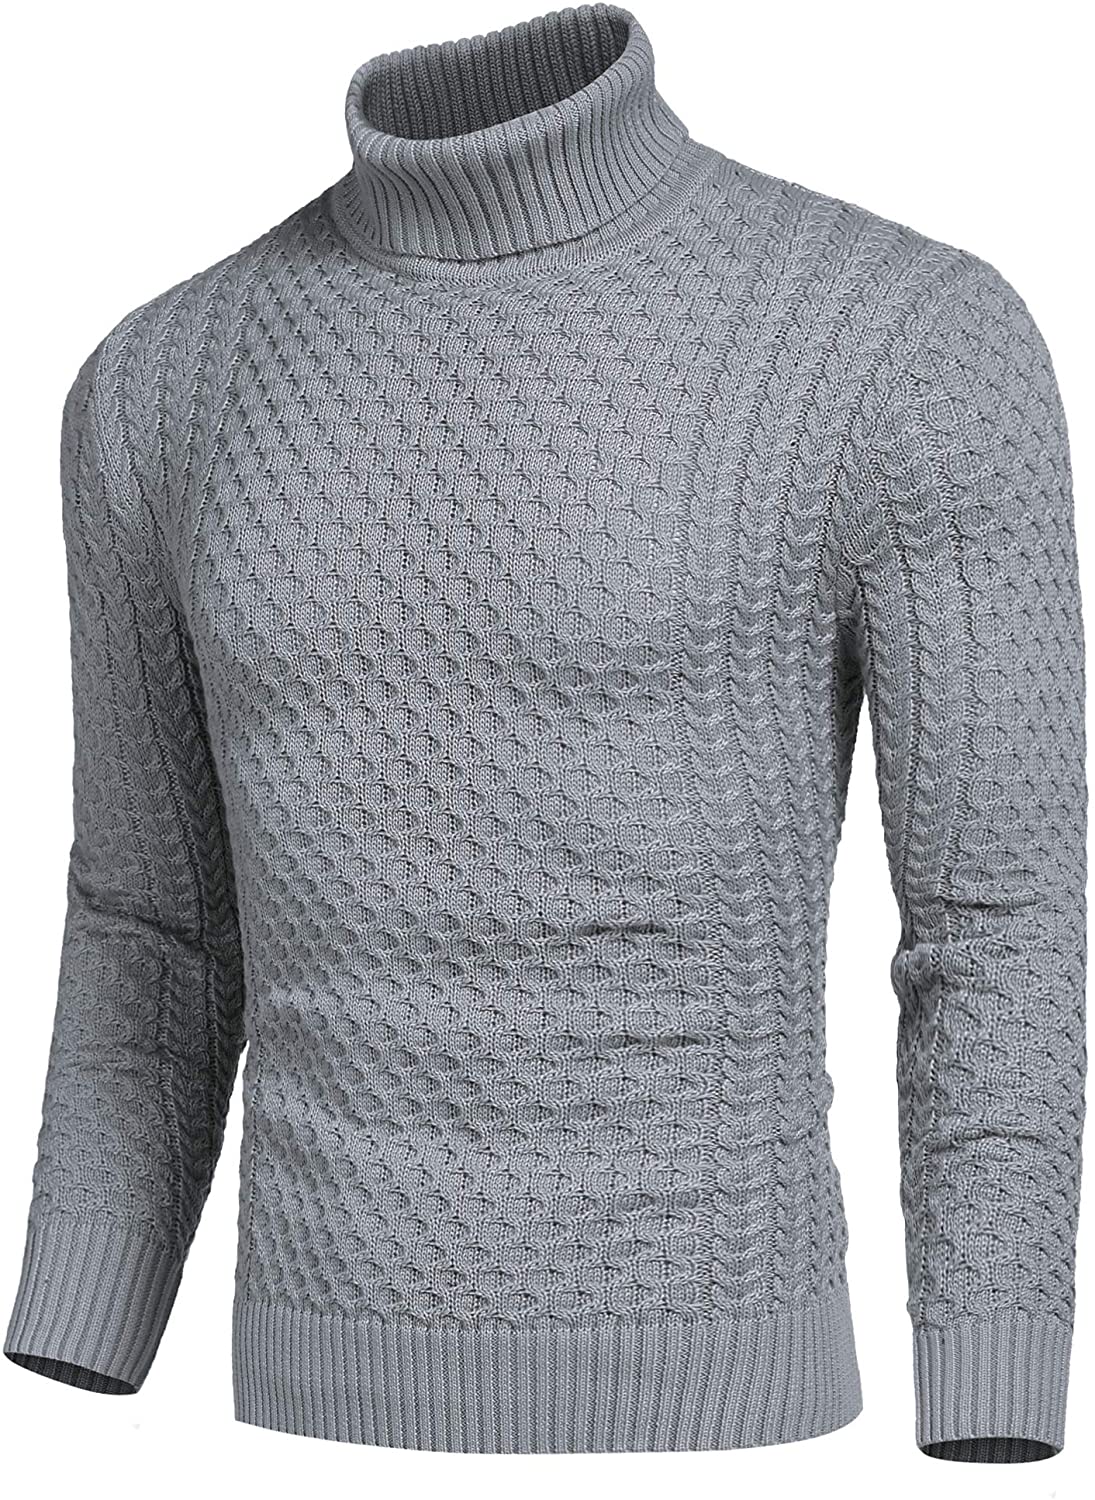 COOFANDY Men's Slim Fit Turtleneck Sweater Casual Knitted Twisted ...